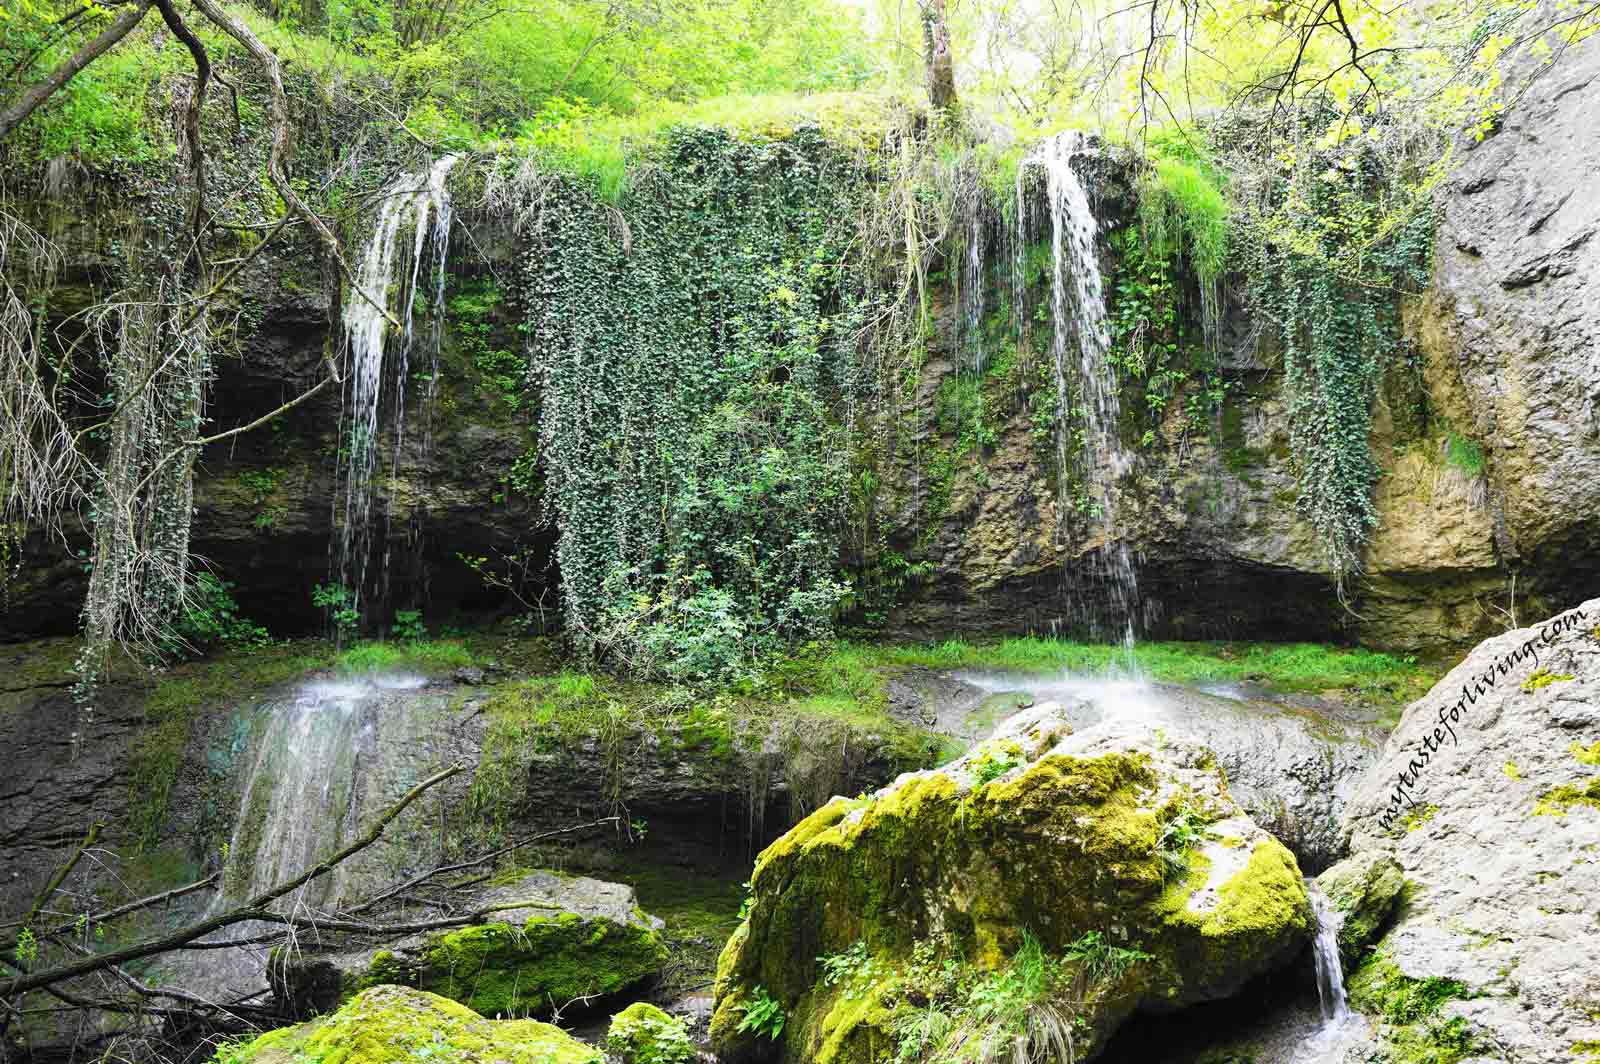 Kartalа waterfalls are located near the town of Veliko Tarnovo, Bulgaria. You can reach them on a path from the Transfiguration Monastery or from the city itself. We took the path that leads from the Kartala neighborhood in Veliko Tarnovo and parked next to the Kartala shooting range. 